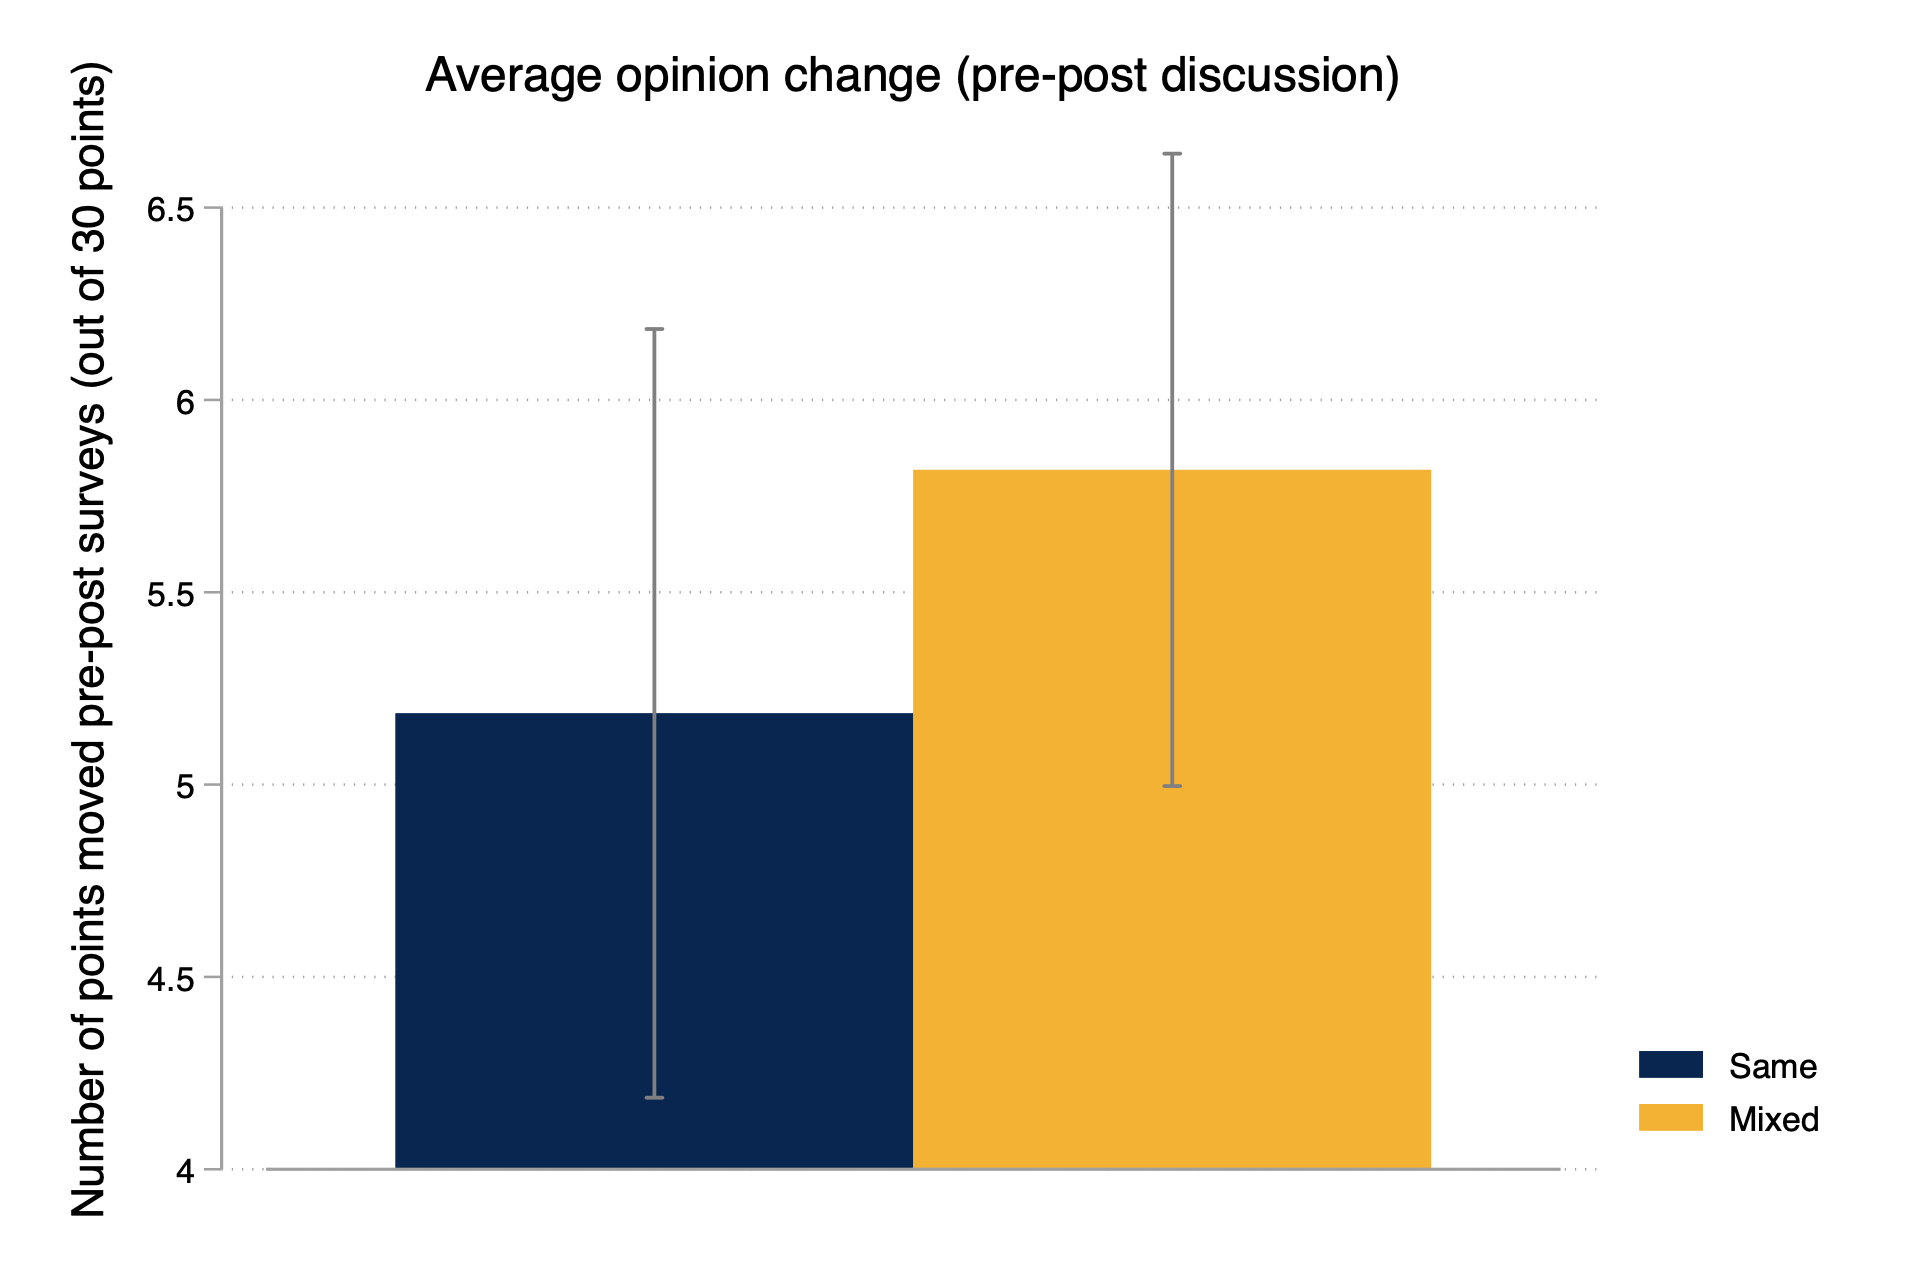 Study results for opinion change